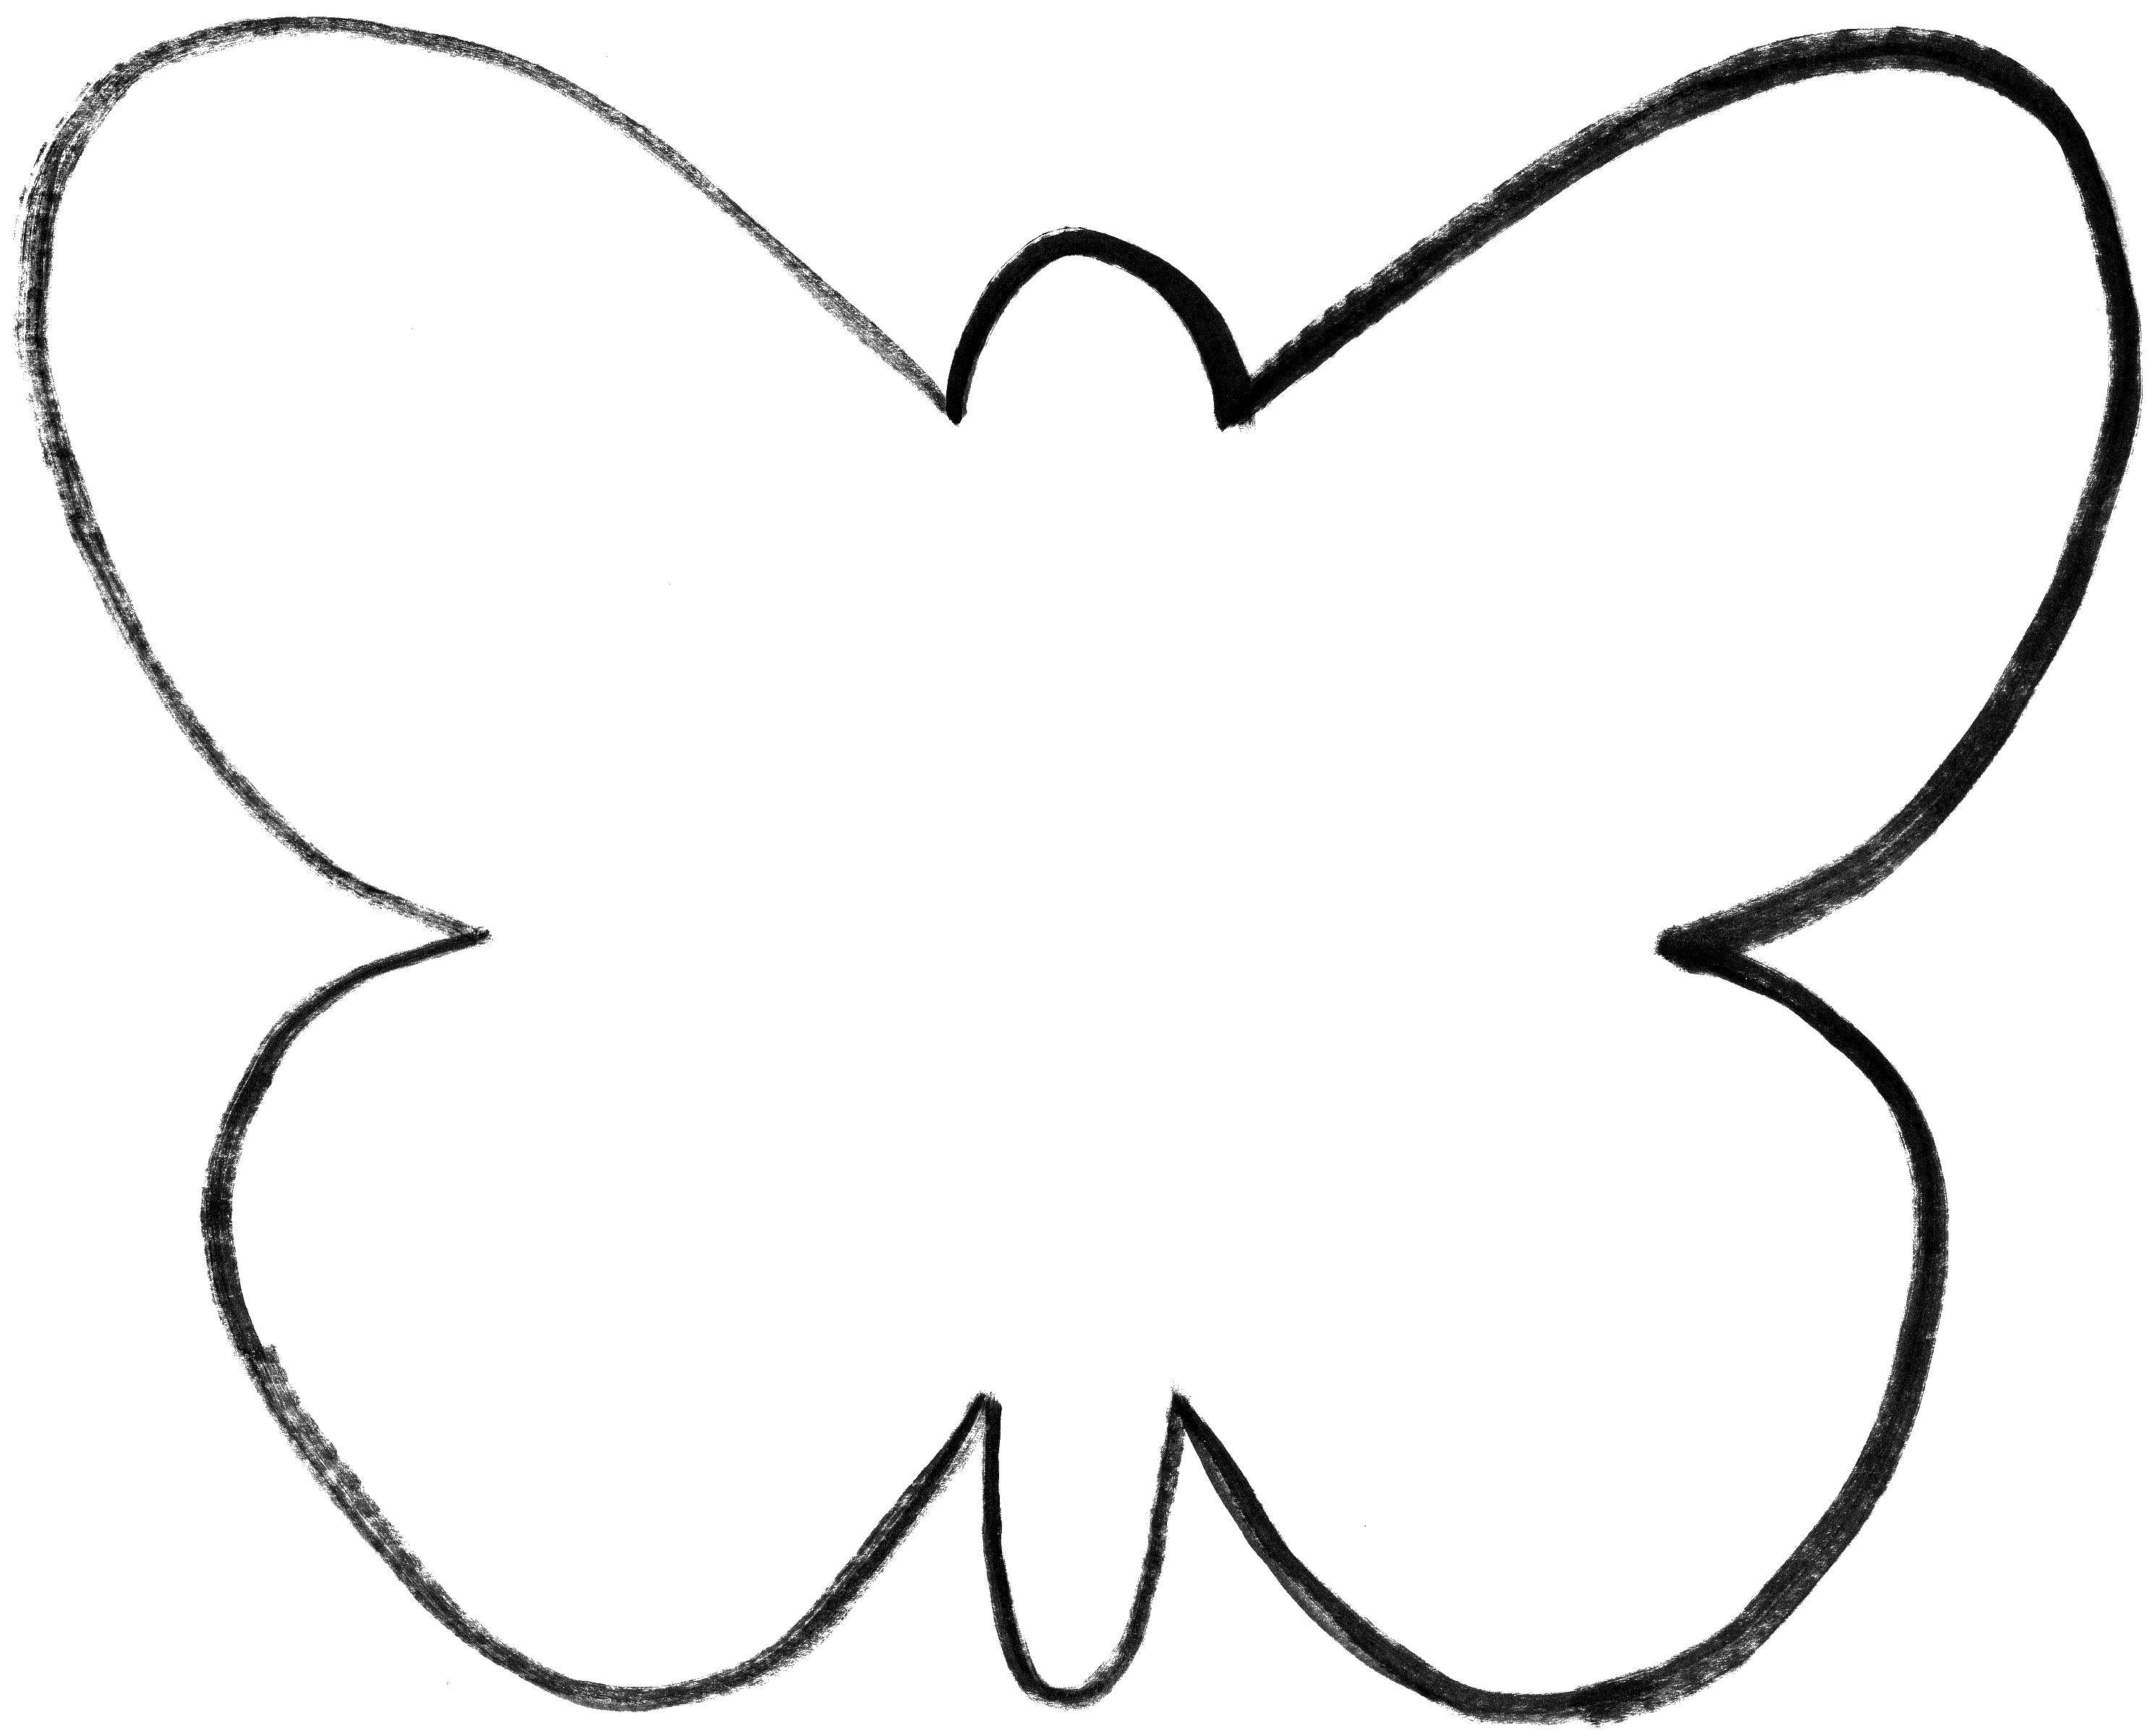 Coloring The stroke of the butterfly. Category the contours for cutting out butterflies. Tags:  Outline , butterfly.